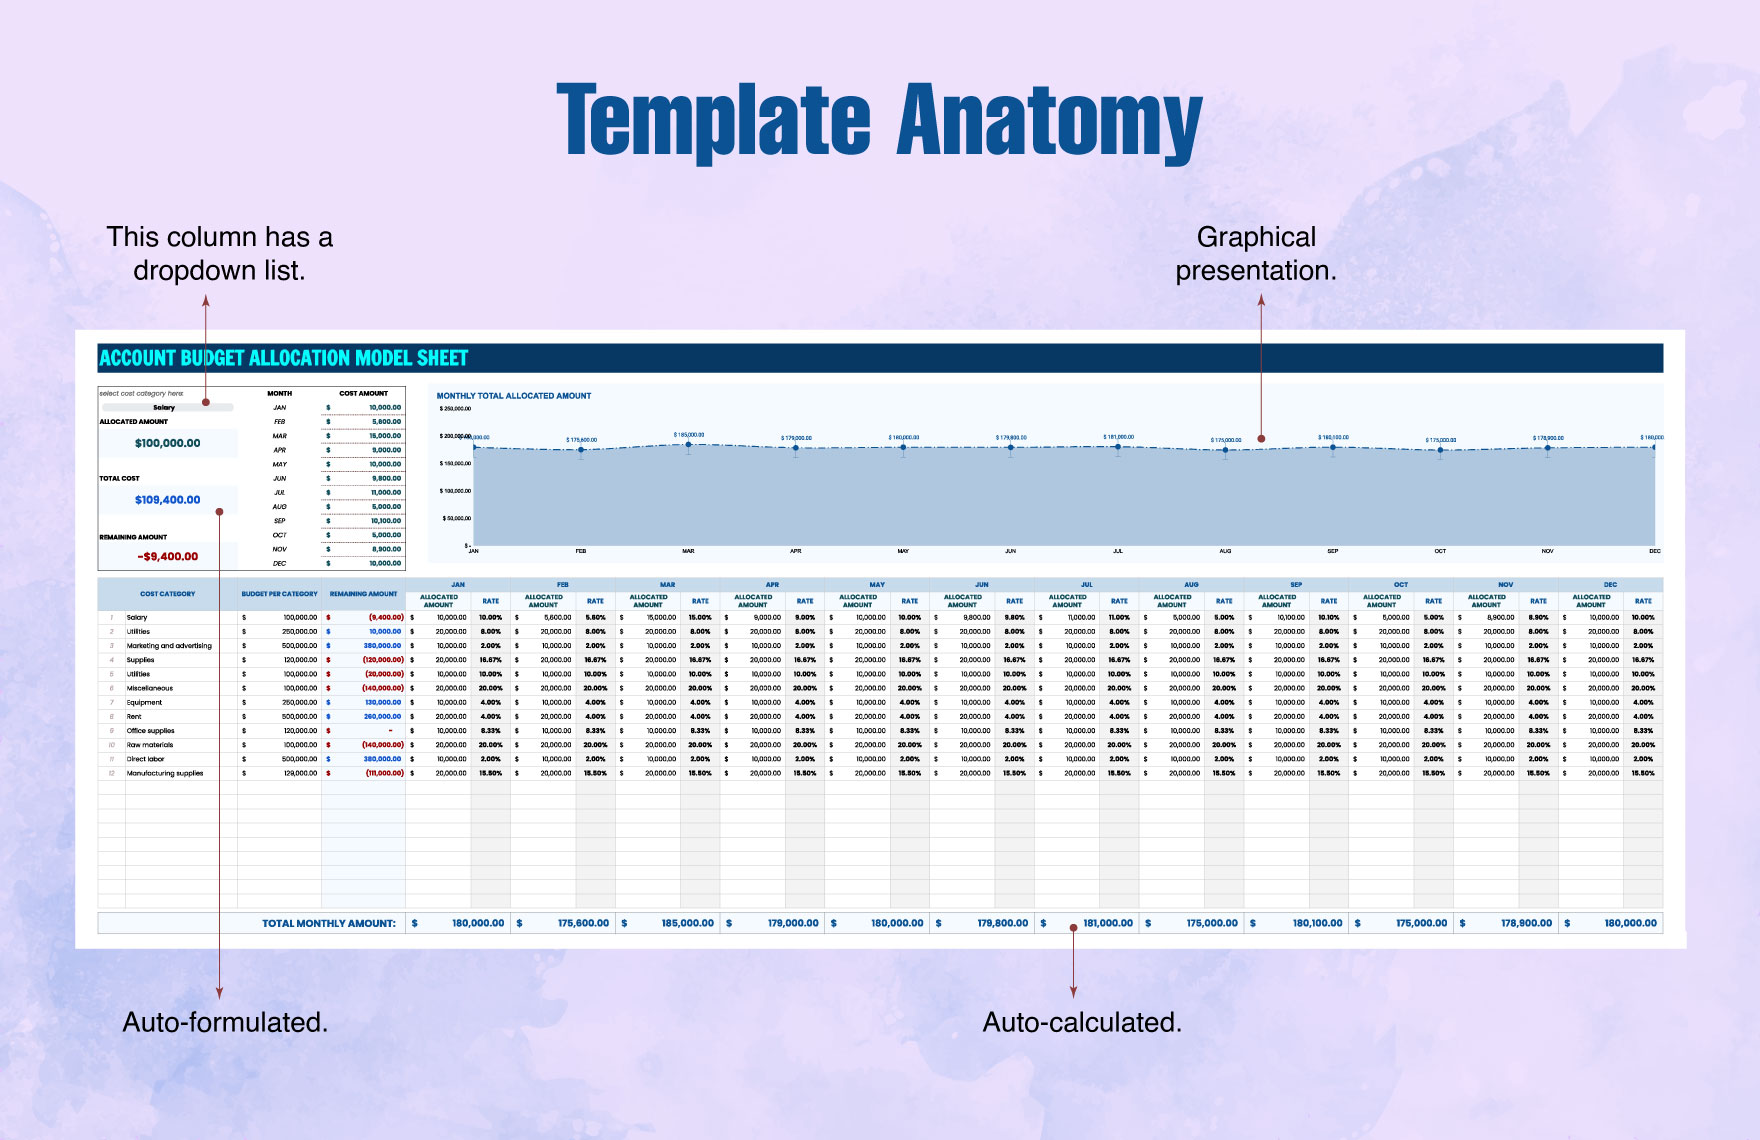 Account Budget Allocation Model Sheet Template